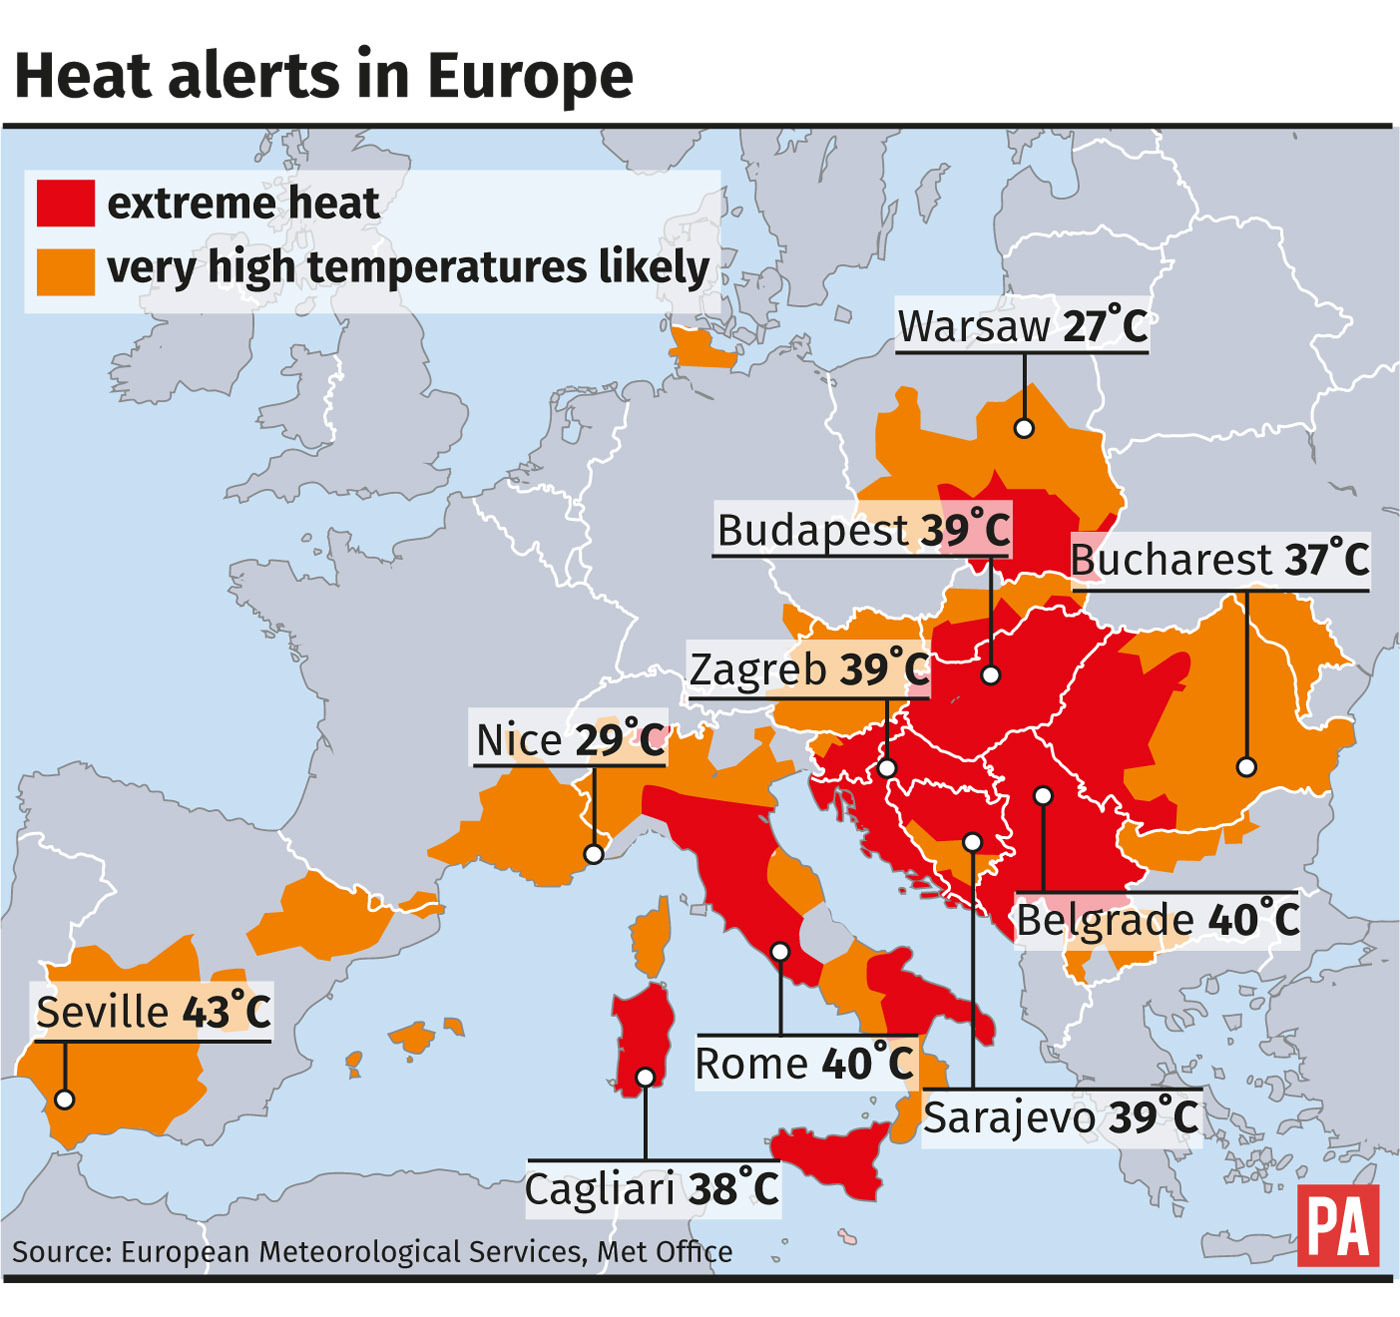 Heatwaves and weather events ‘could kill over 100,000 a year in Europe by 2100’ BT